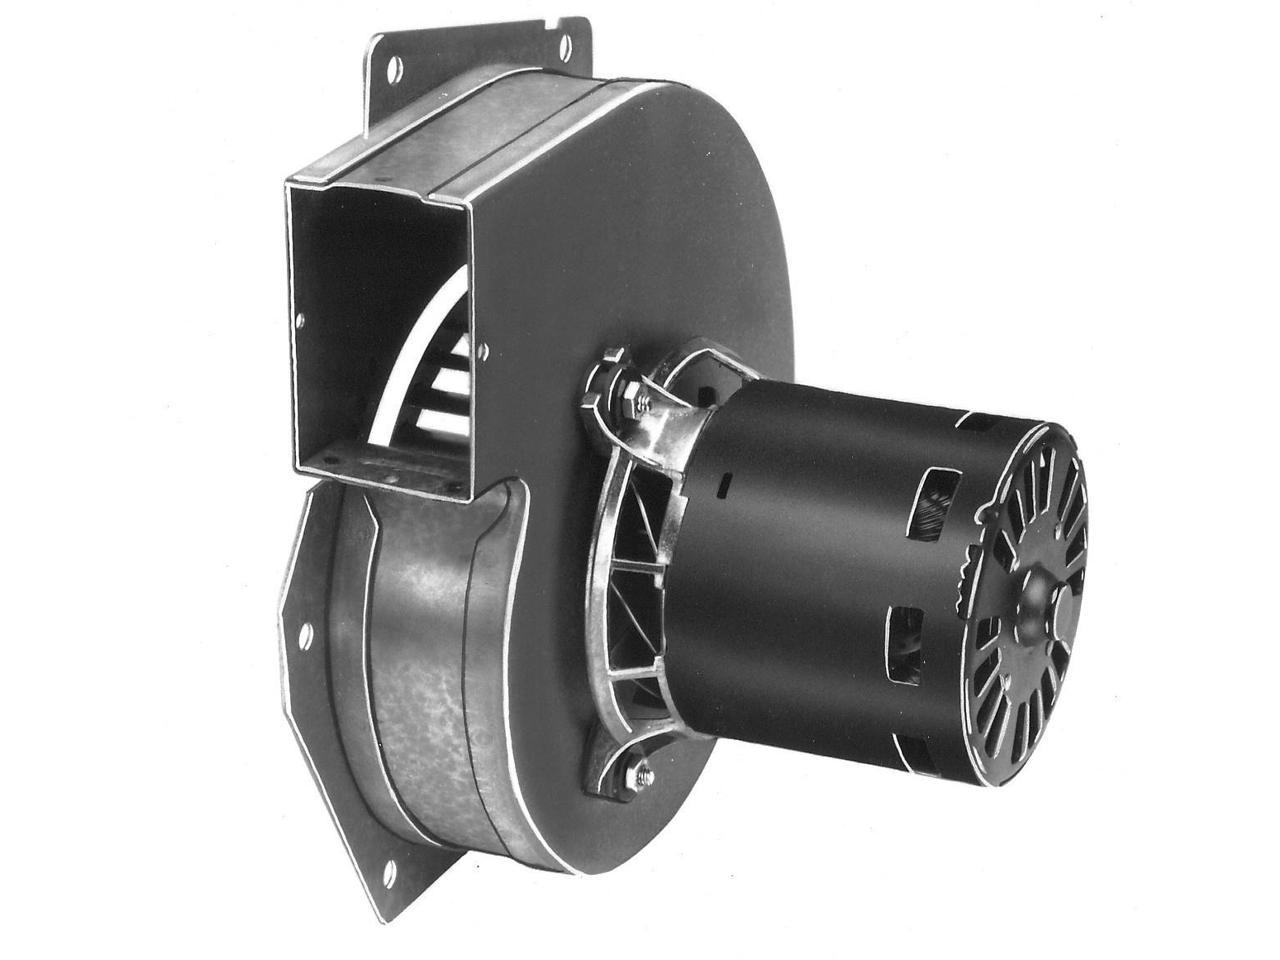 Draft Inducer Blower 115 Volts Fasco # B23618 for sale online 